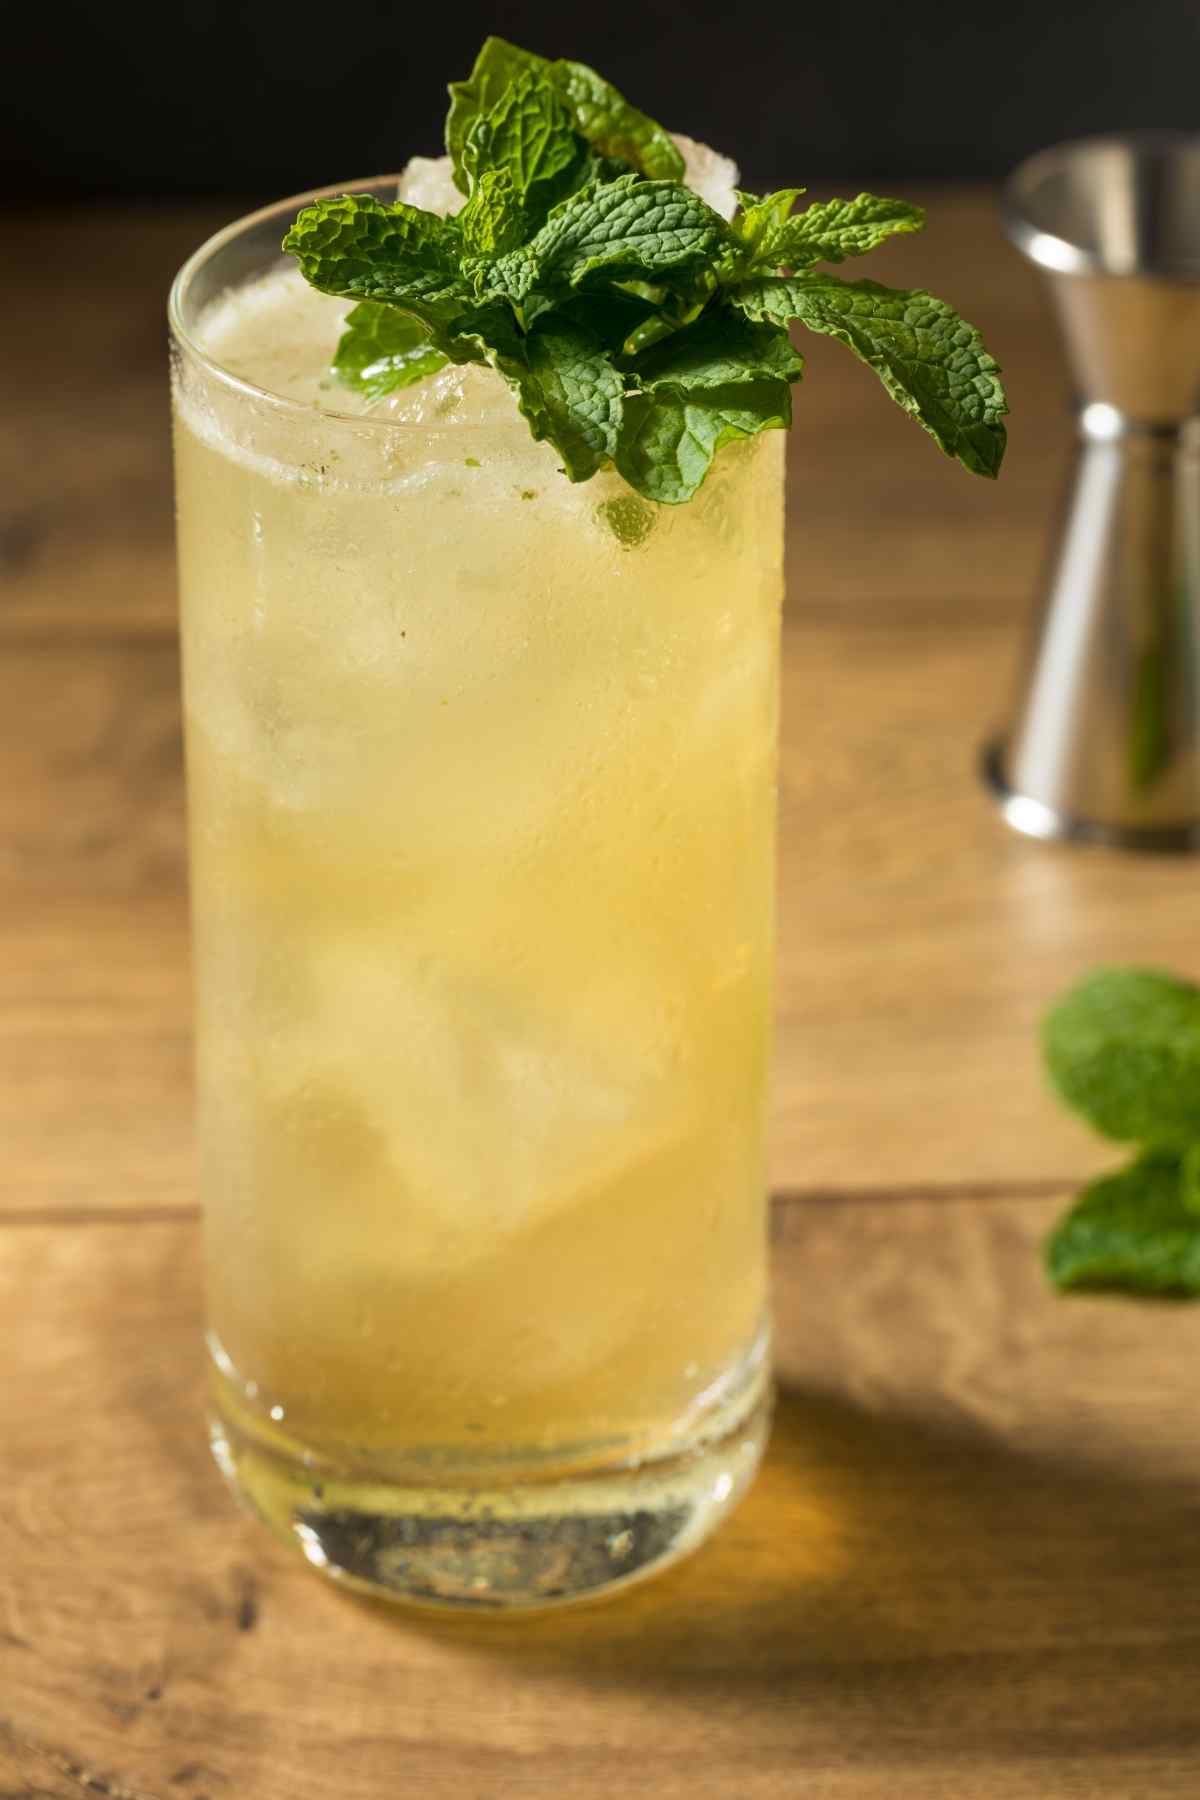 A Gin Drink For Non-Gin Drinkers — Tribe’s CBD Gin Gin Mule Recipe